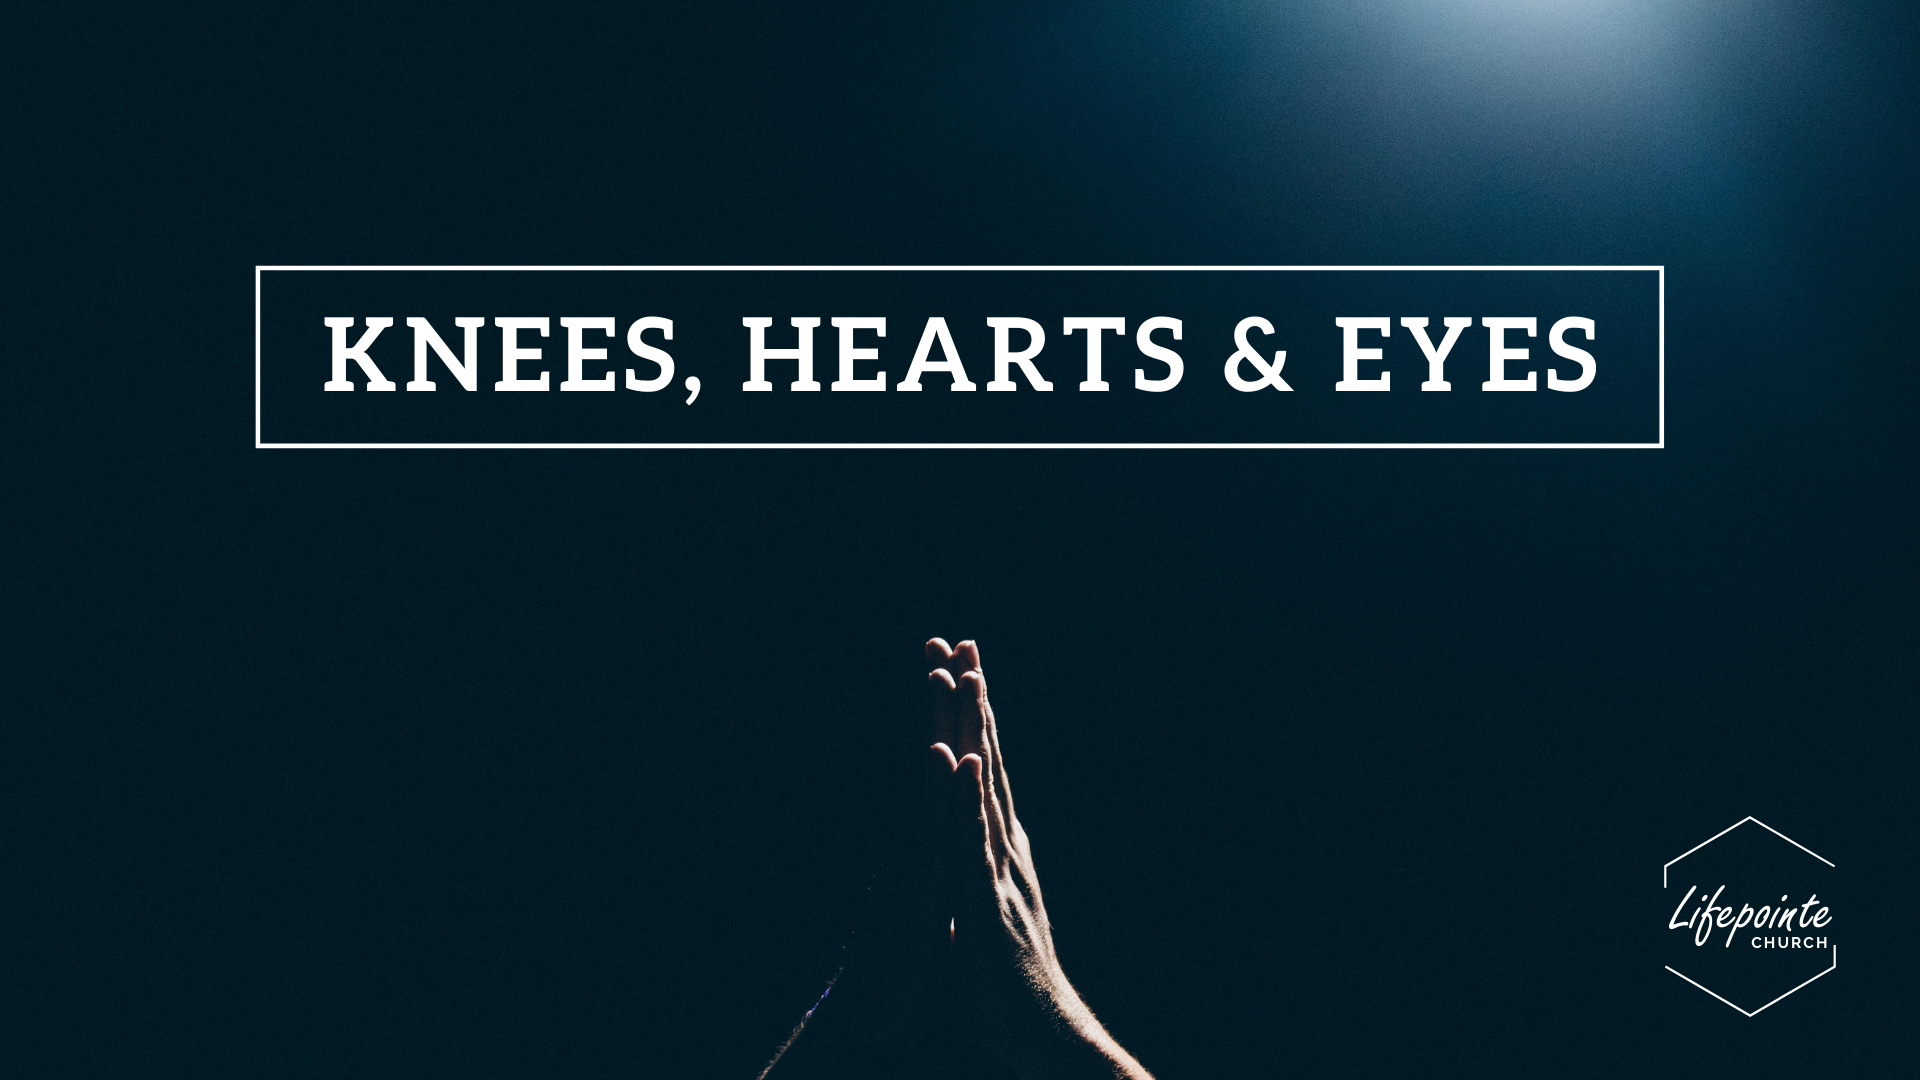 Knees, Hearts & Eyes - 1920 x 1080 (heading only).png